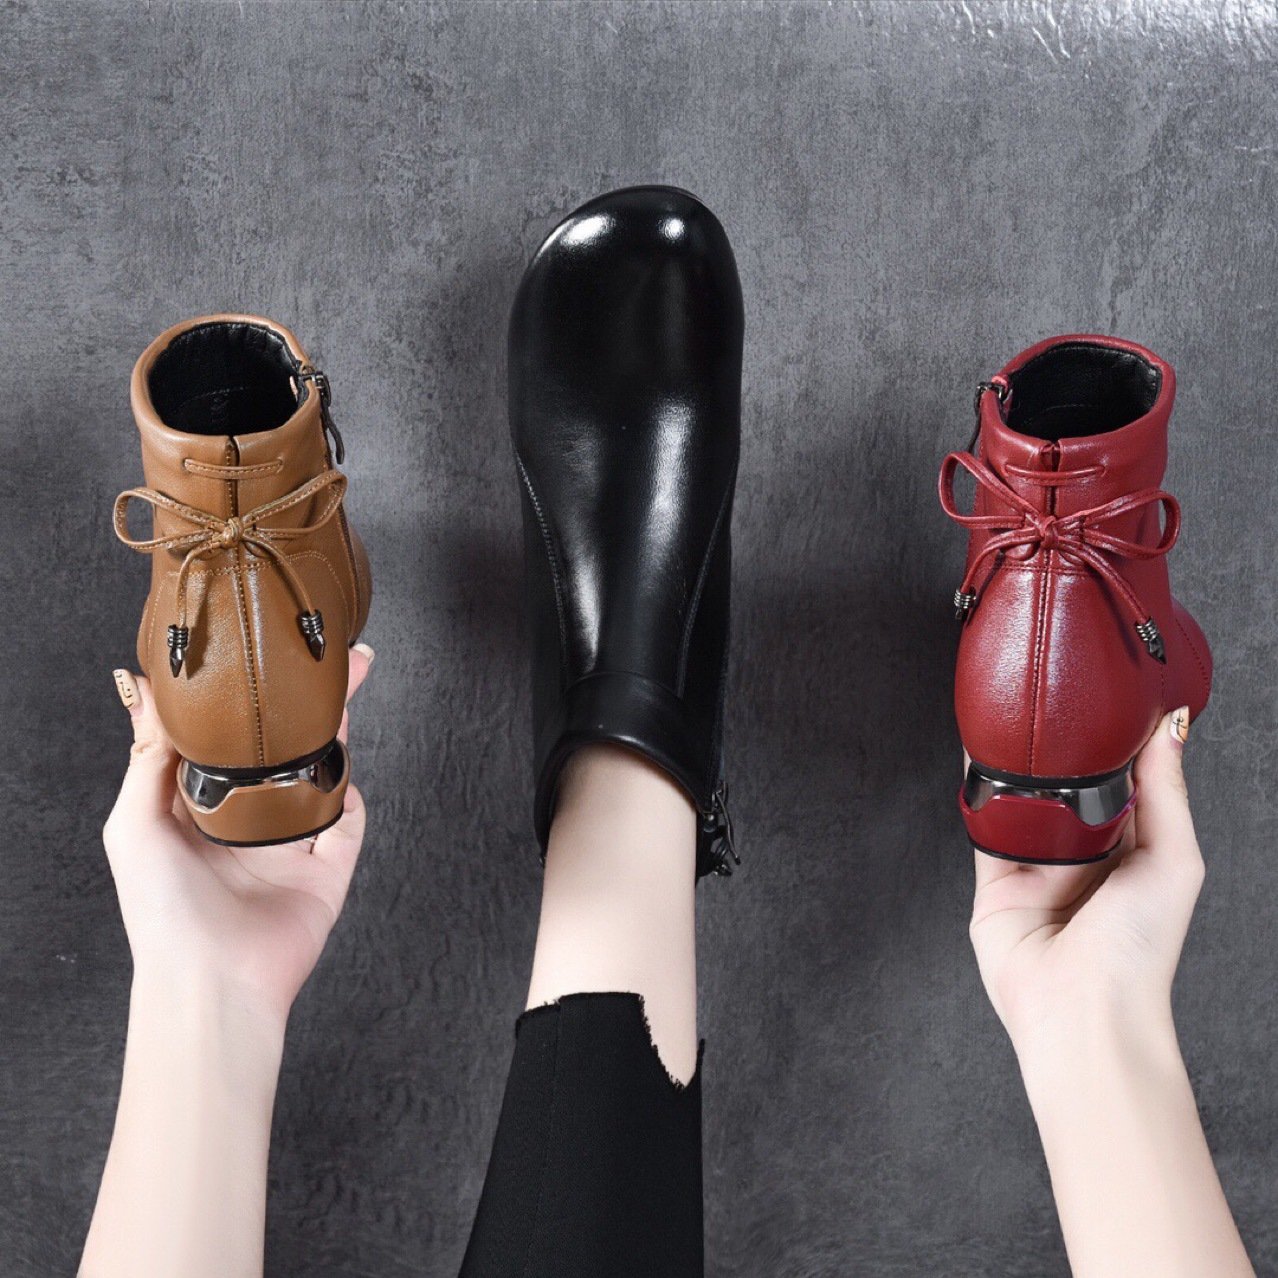 Handmade leather low-heeled ankle boots